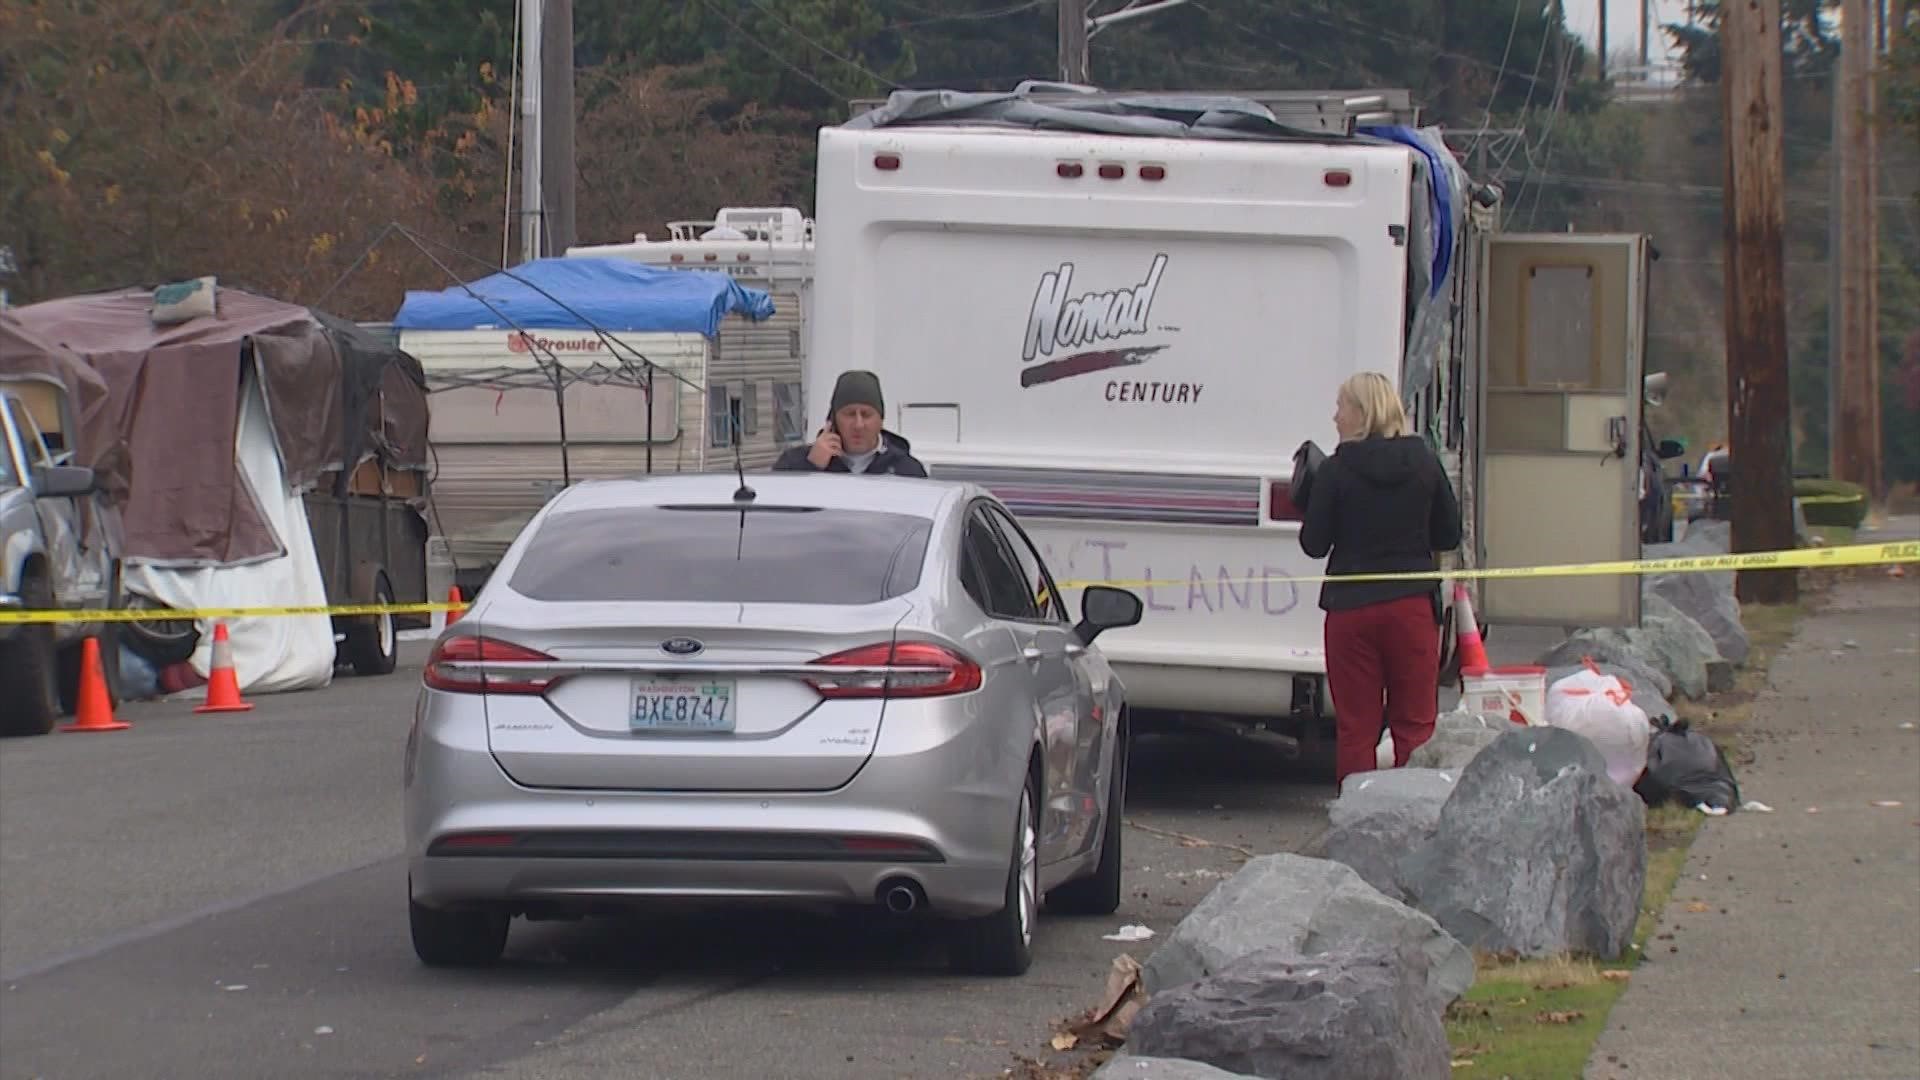 Two people were found dead Monday morning in Tacoma with gunshot wounds.